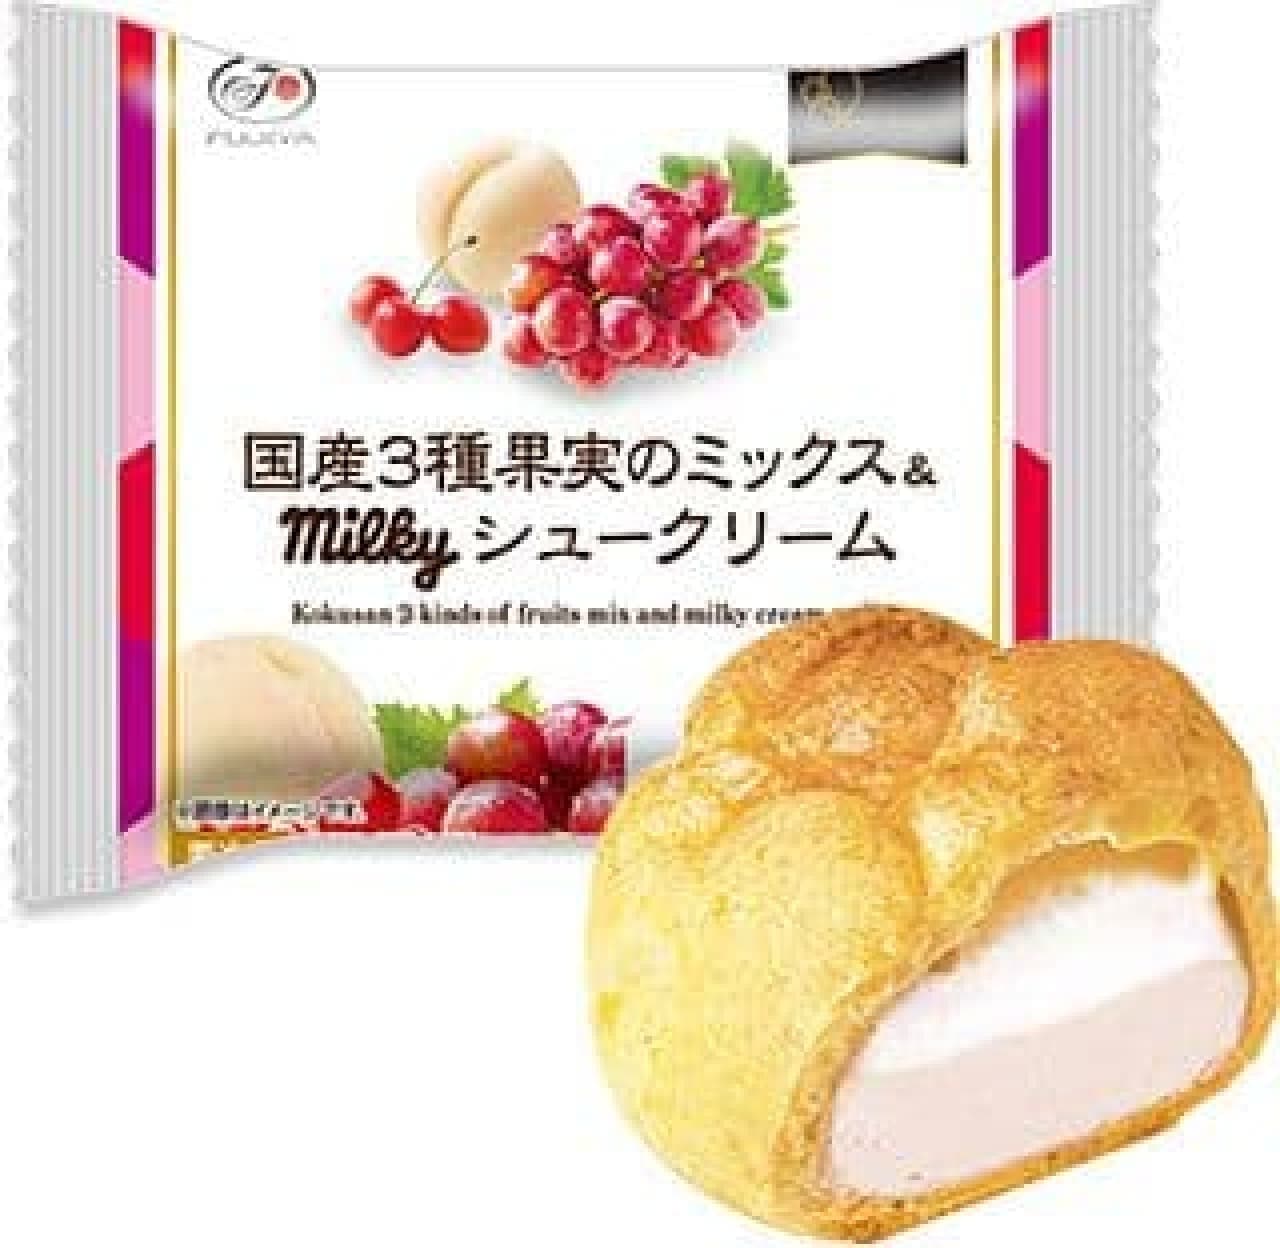 Fujiya "Mixed & Milky Cream Puffs with 3 Kinds of Domestic Fruits".